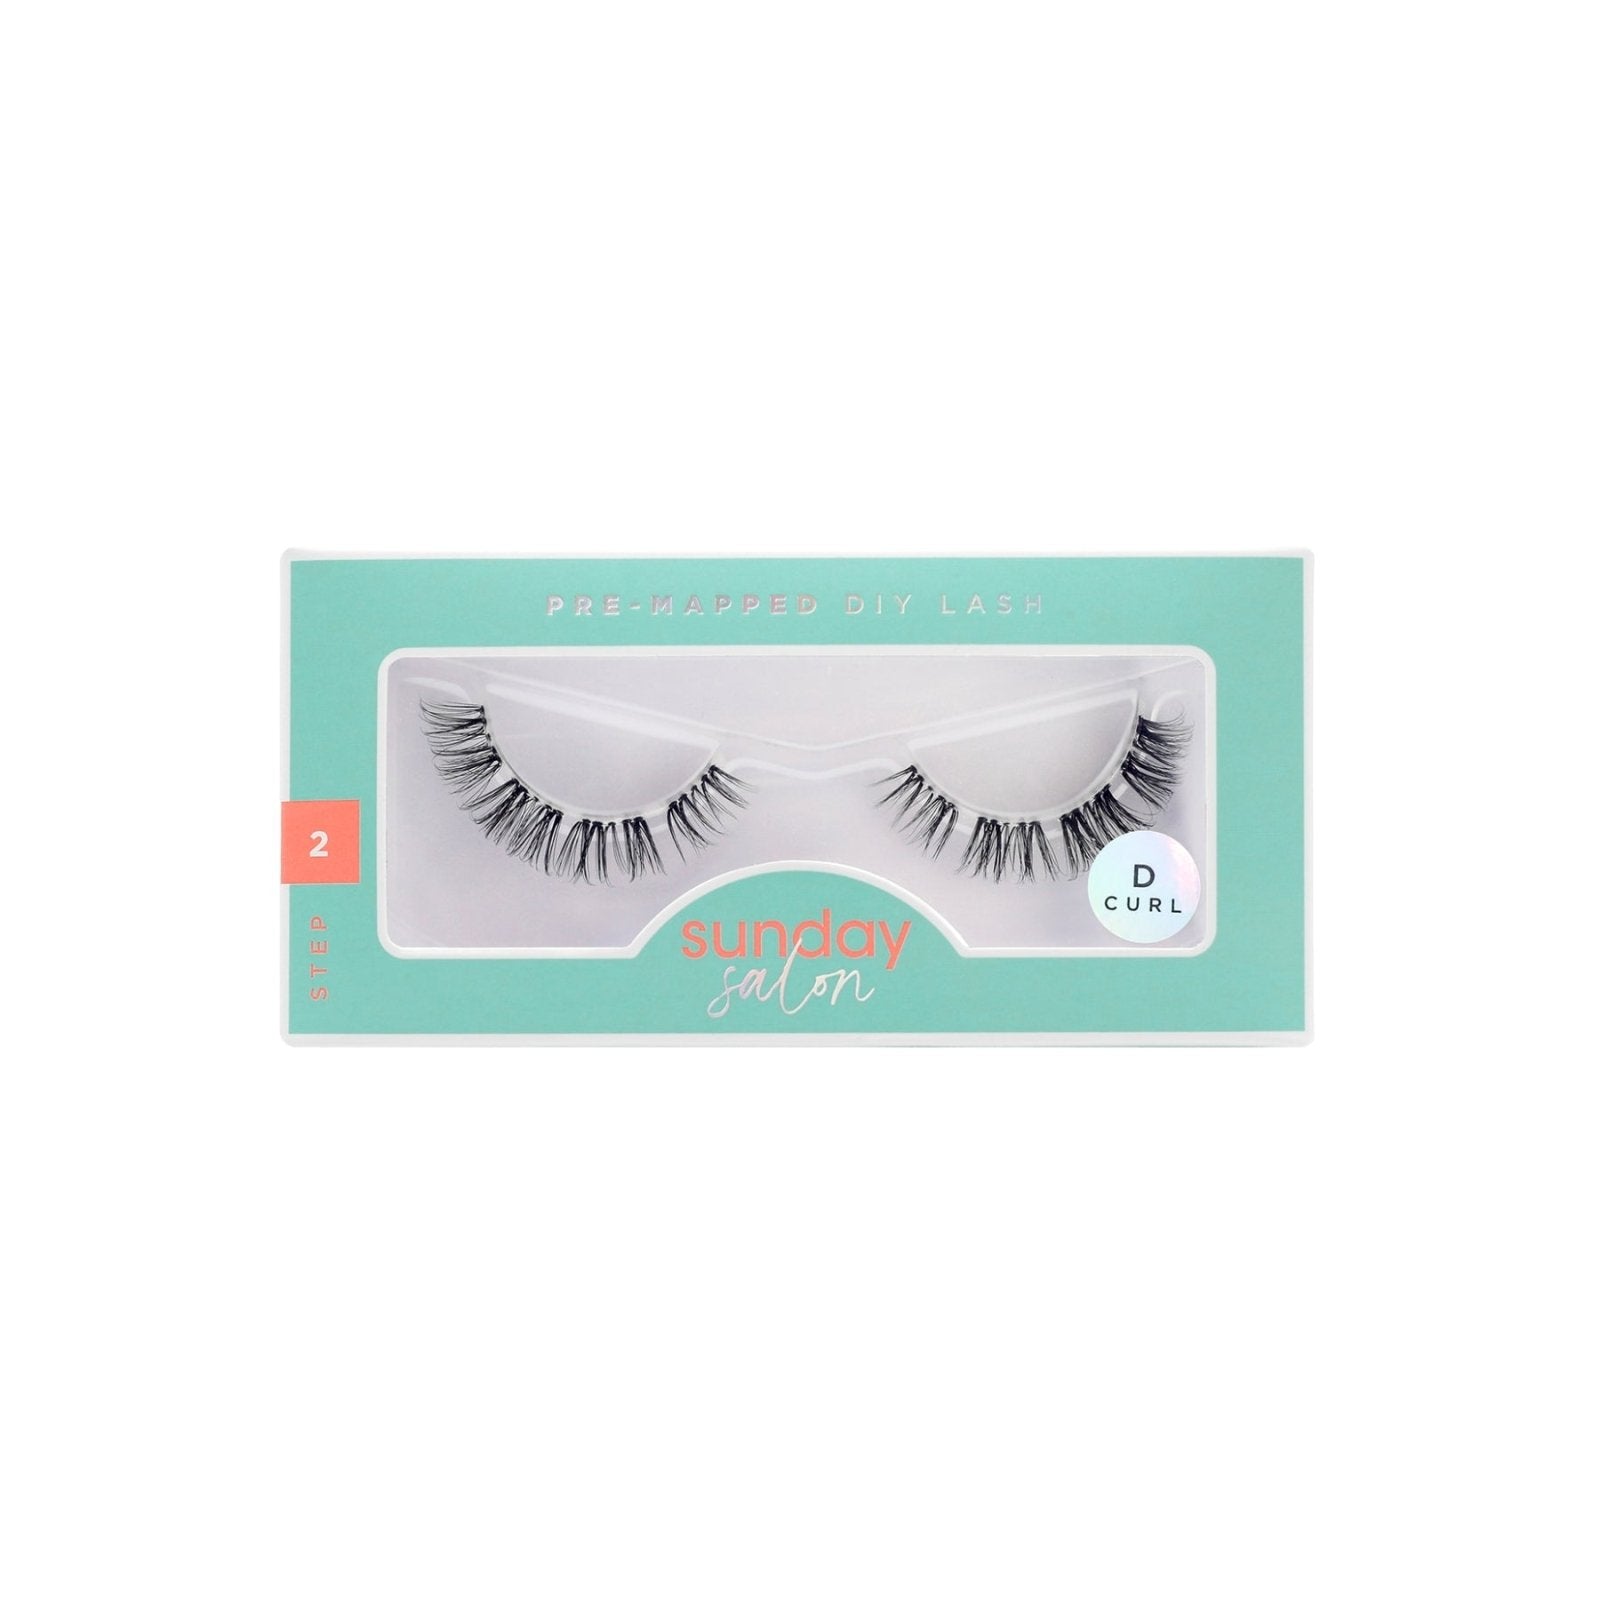 Pointed Hybrid DIY Lash Extensions - Lola's Lashes